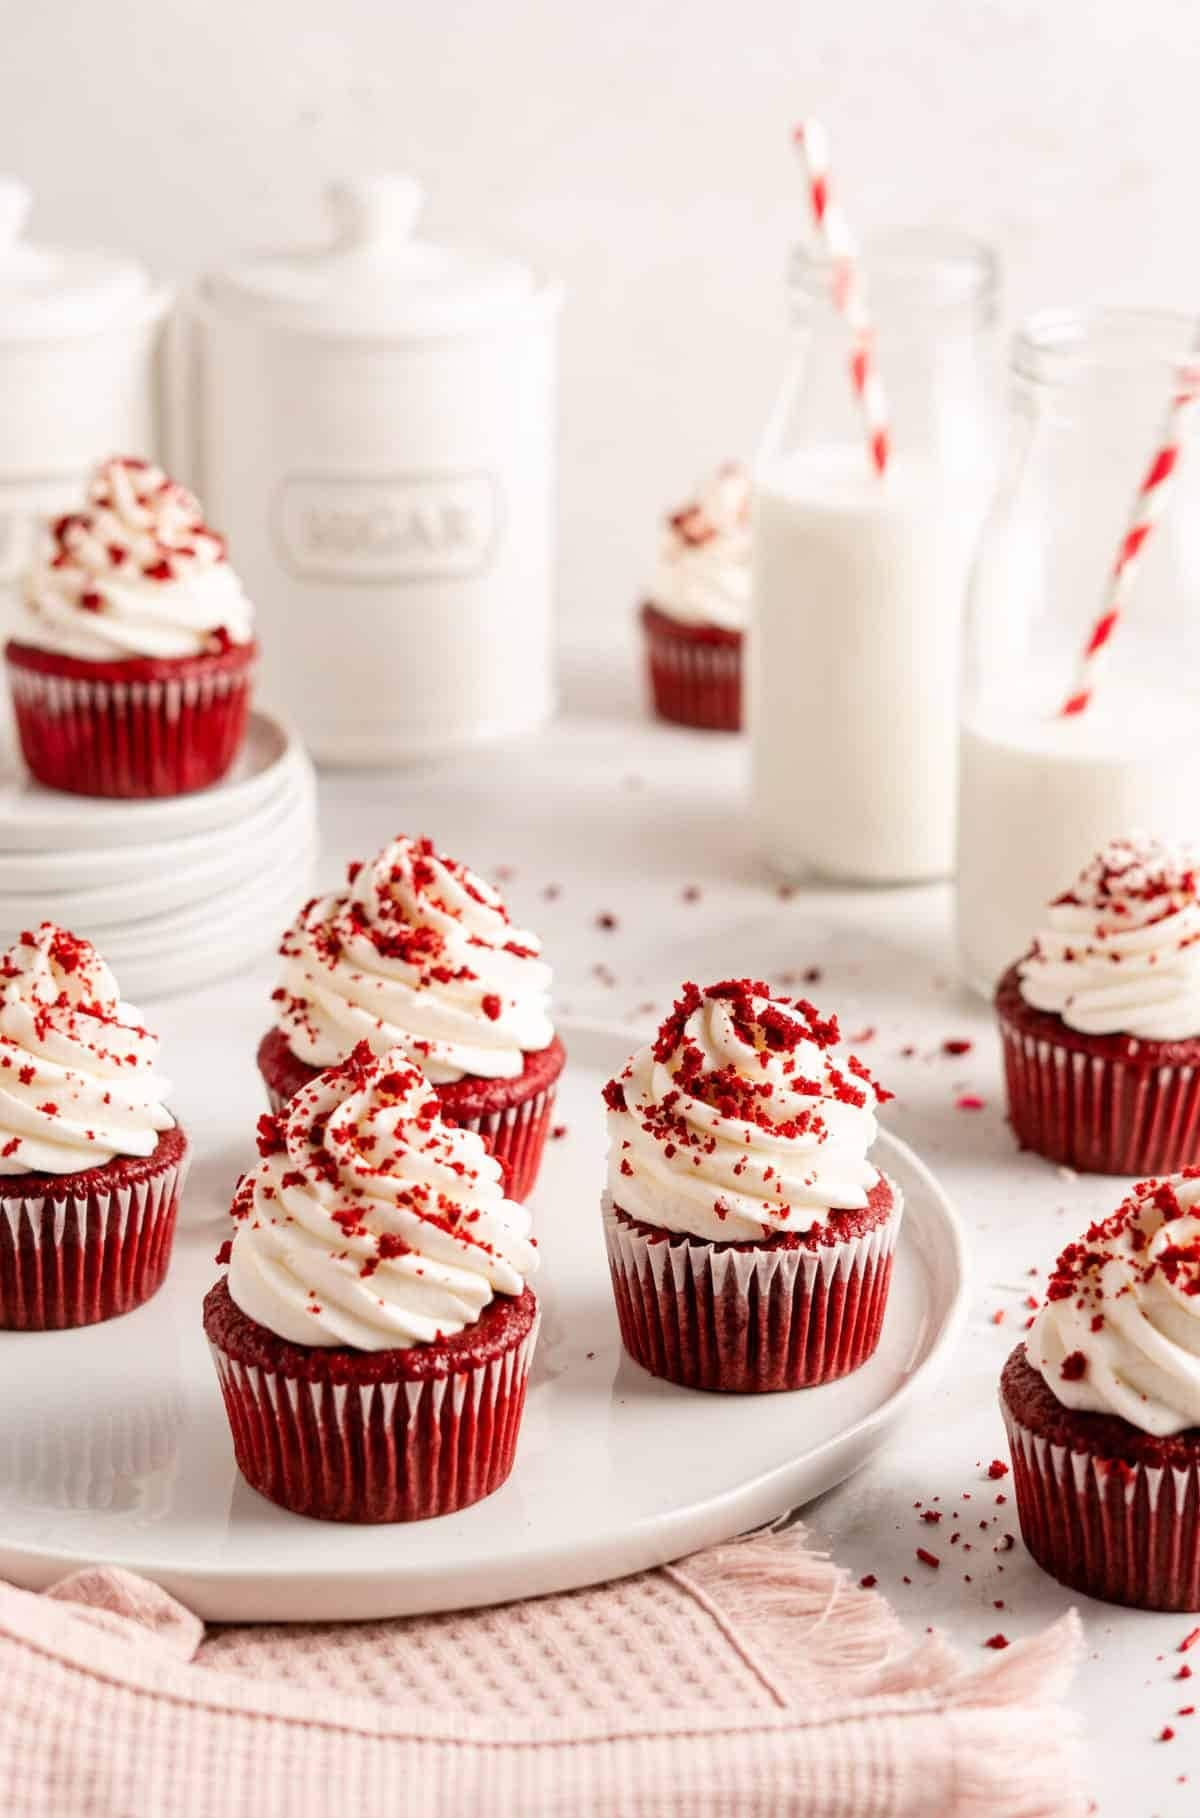 Red velvet cupcakes topped with cream frosting.